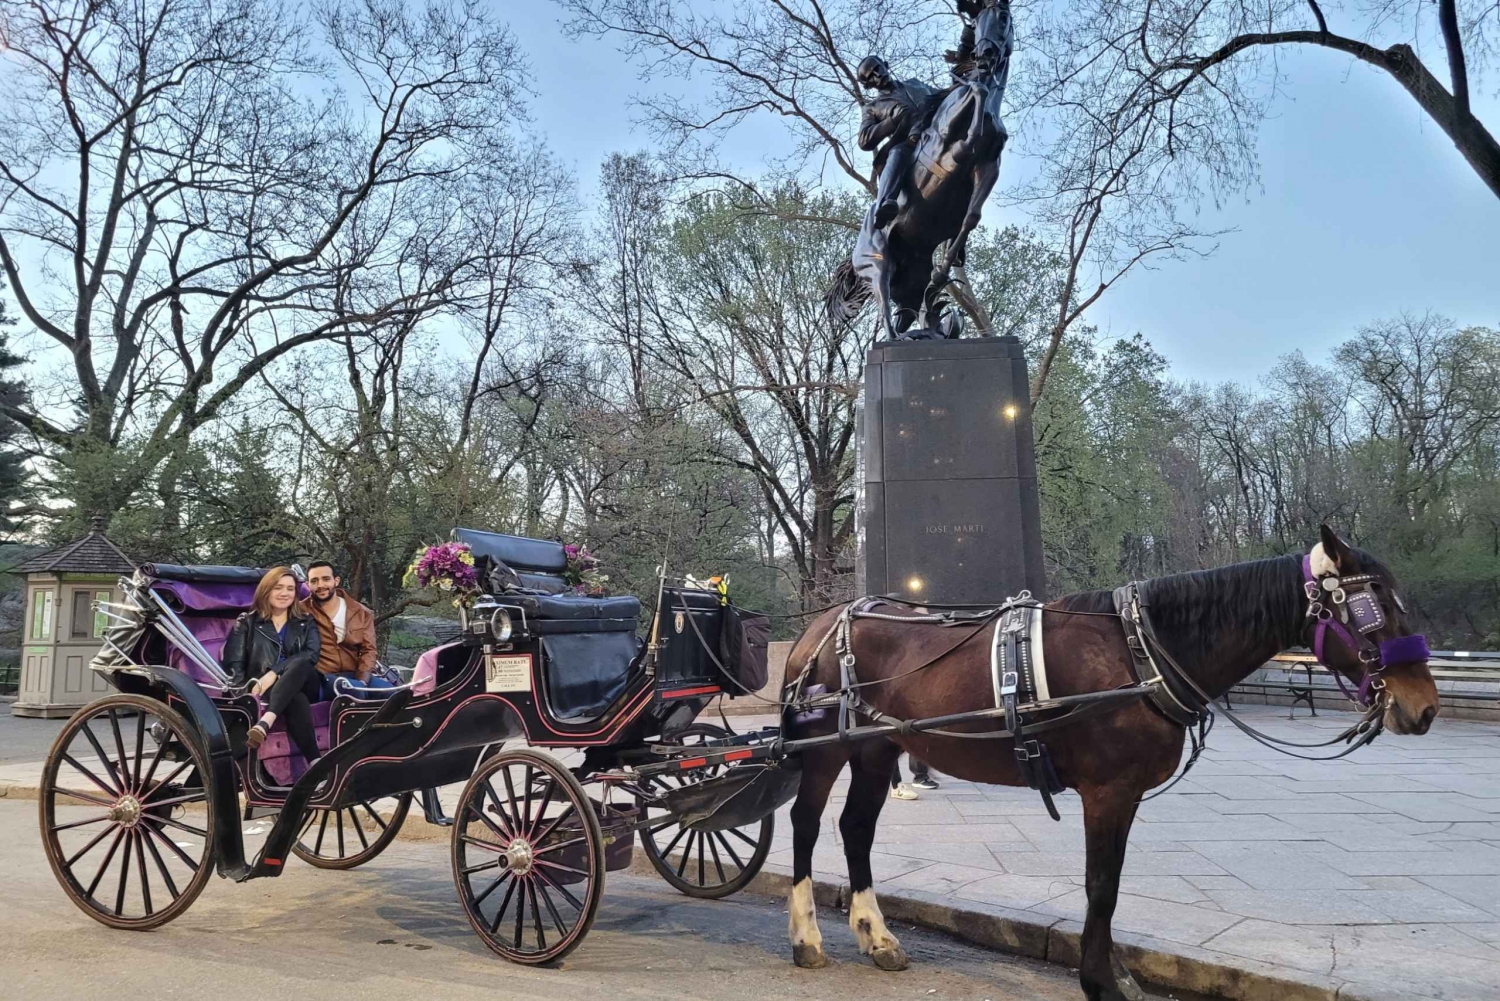 NYC: Guided Central Park Horse Carriage Ride